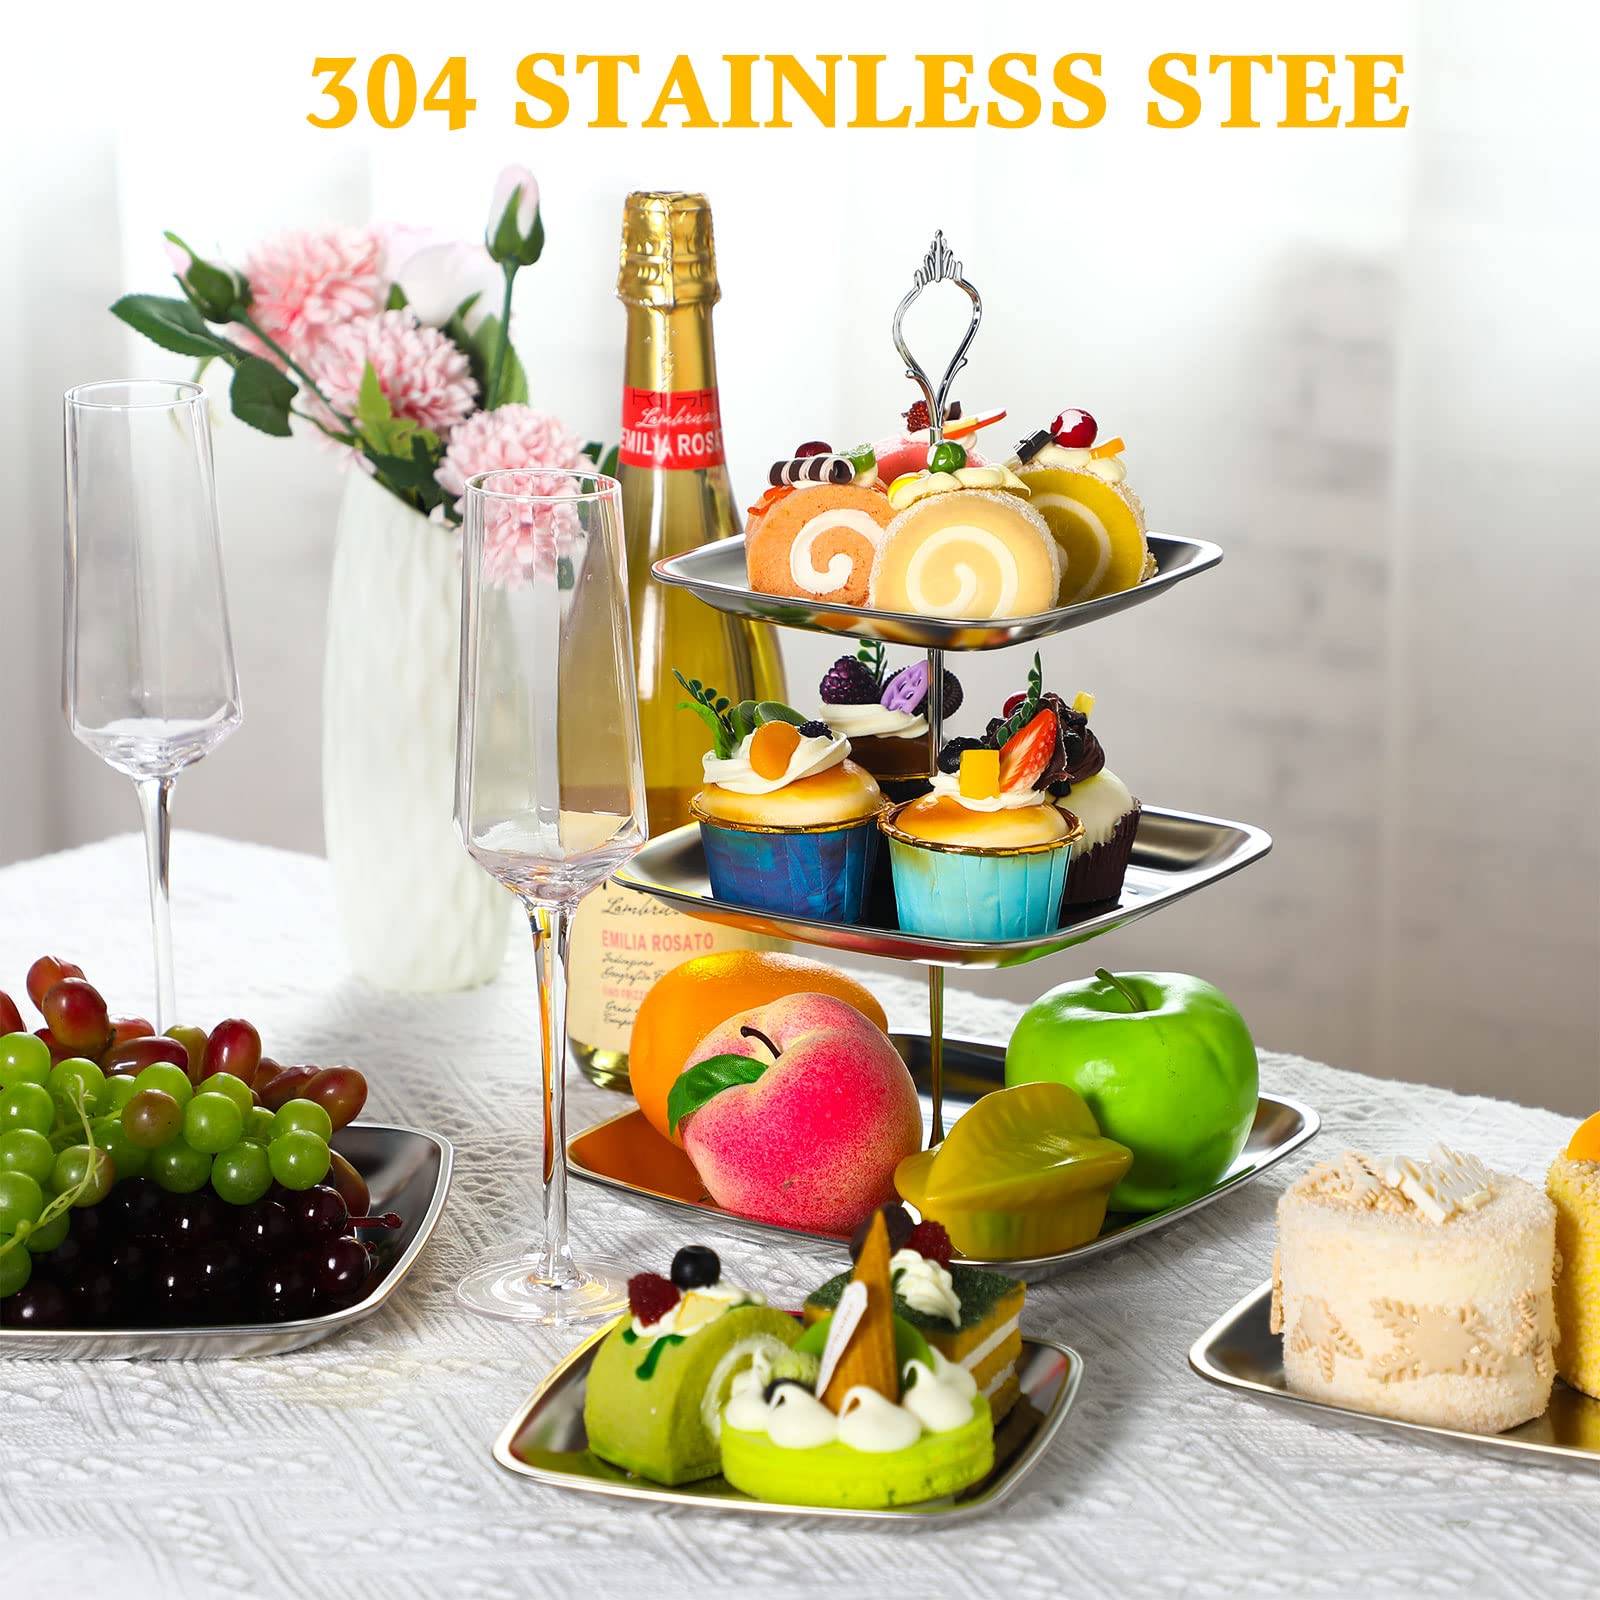 Gerrii 2 Pcs Metal 3 Tiered Cupcake Stand Cake Stand Pastry Stand 3 Tiered Stainless Steel Cup Cake Dessert Stand Serving Tray for Wedding Birthday Party (Silver)